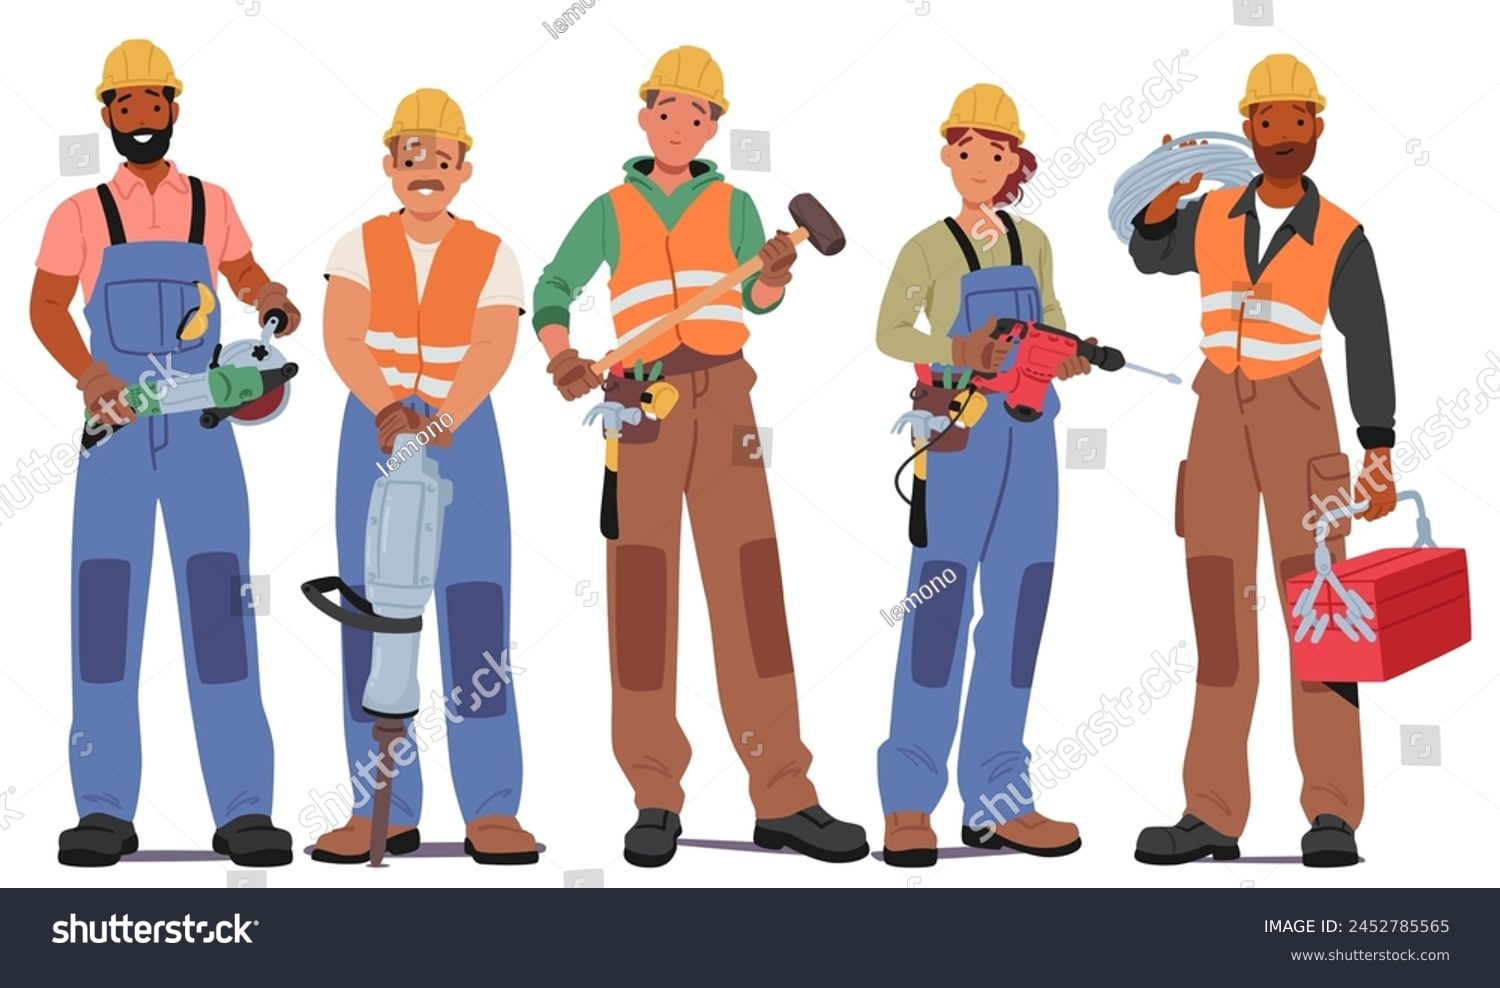 SVG of Construction Workers Male and Female Characters Stand in Row With Hammer, Drill, Toolbox, Grinder Tool and Wires, In Hand, Ready To Build And Shape The World. Cartoon People Vector Illustration svg